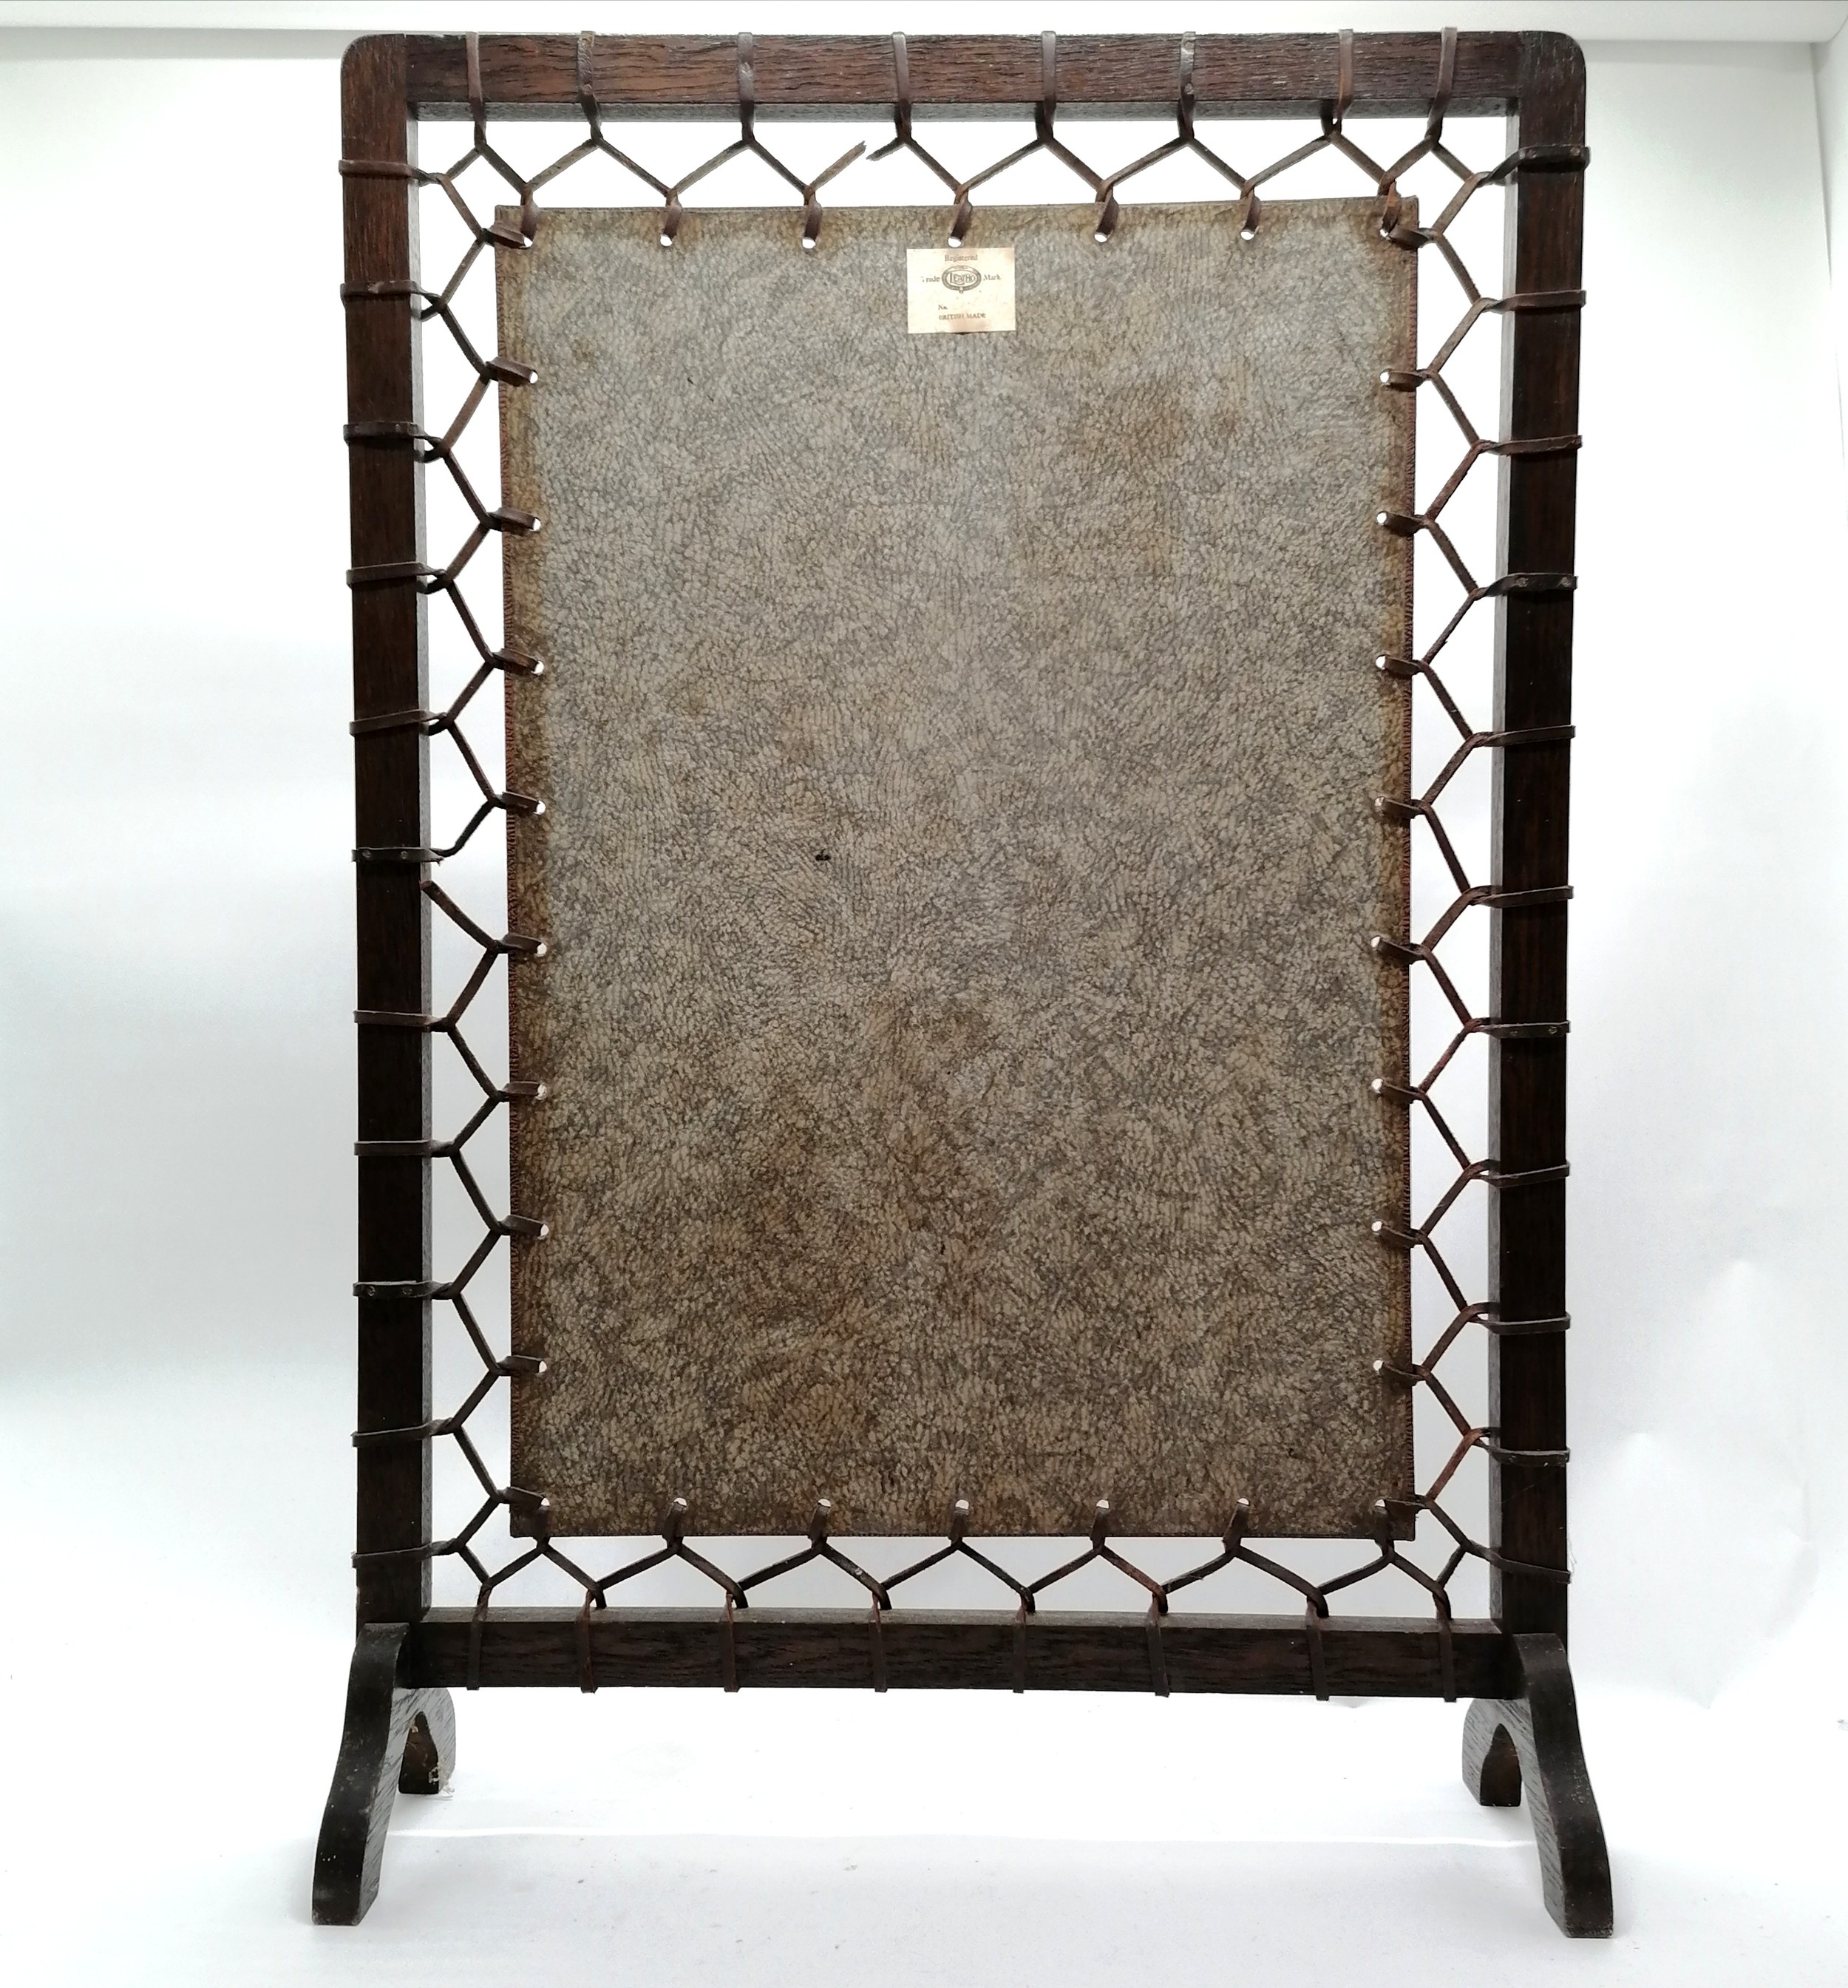 Liberty Arts & Crafts leather tooled fire screen attached to a wooden frame with leather stringing - Image 2 of 5